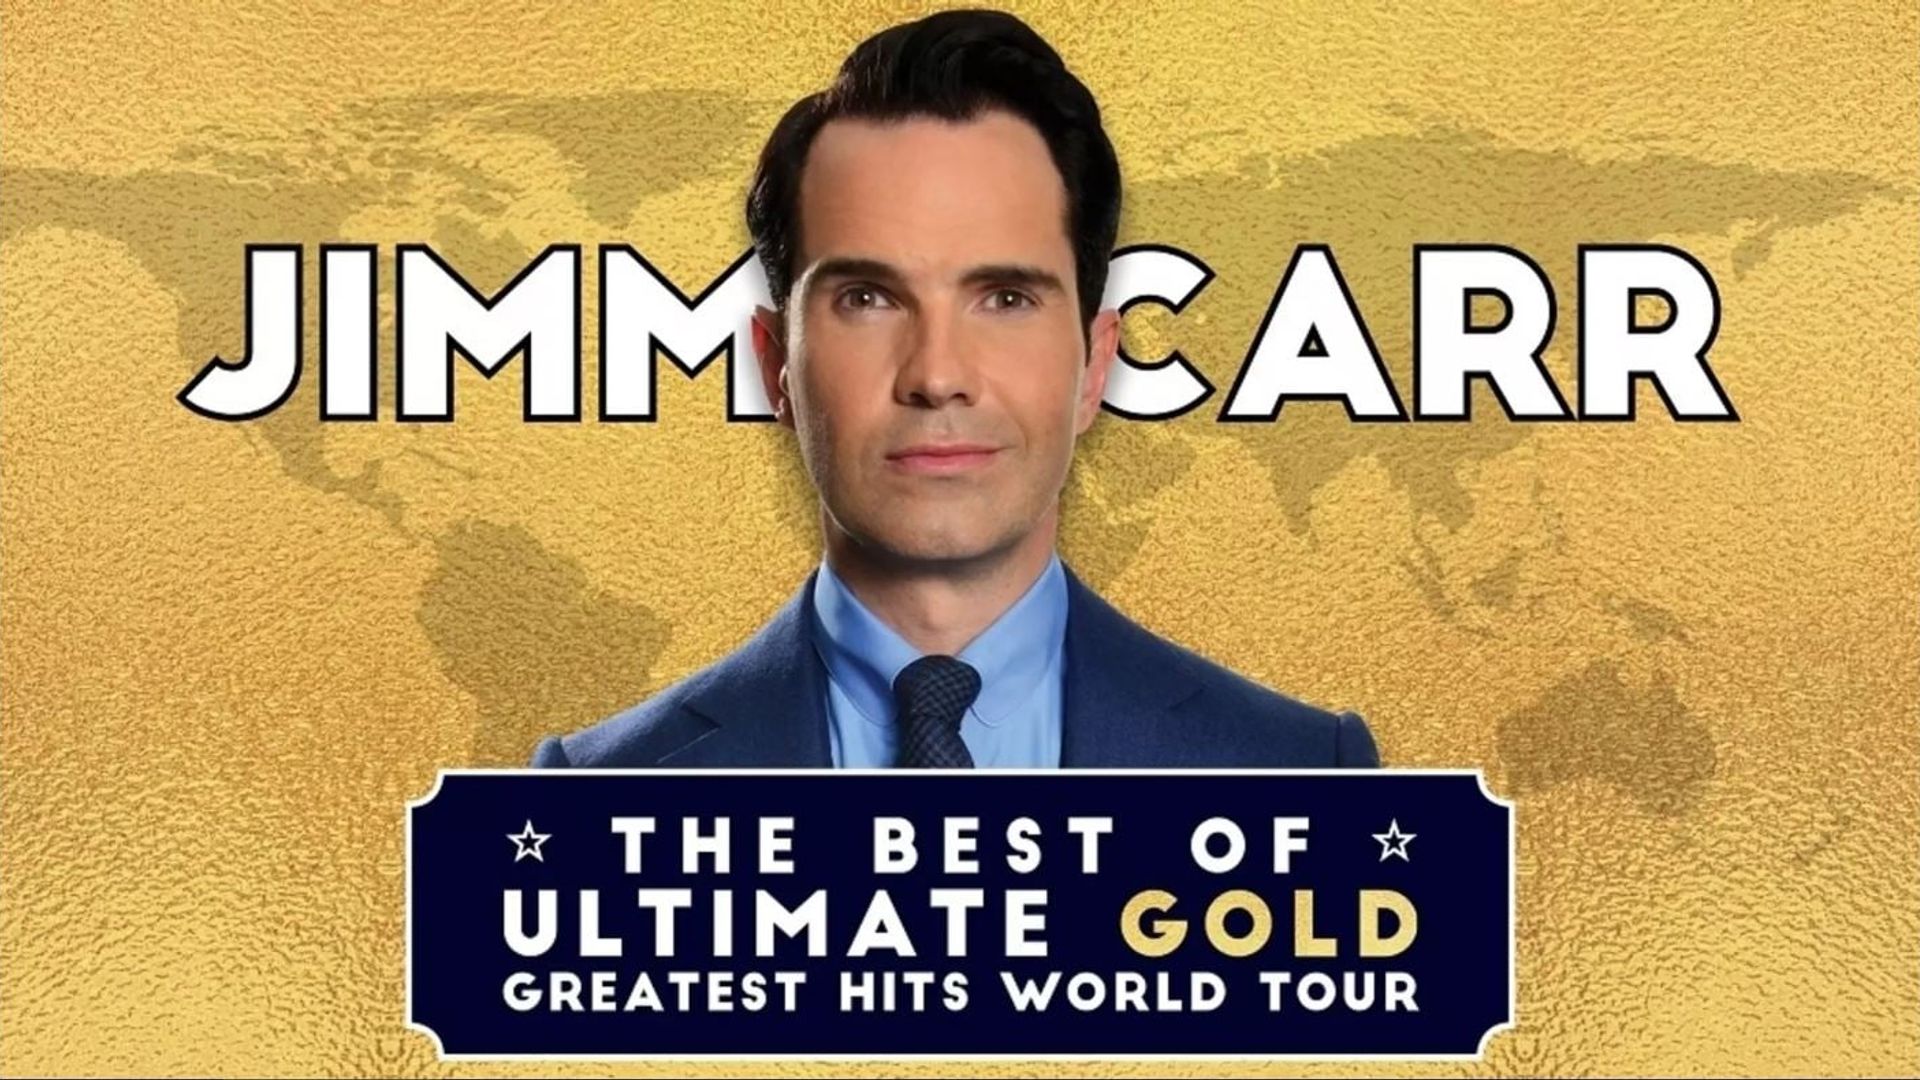 Jimmy Carr: The Best of Ultimate Gold Greatest Hits background